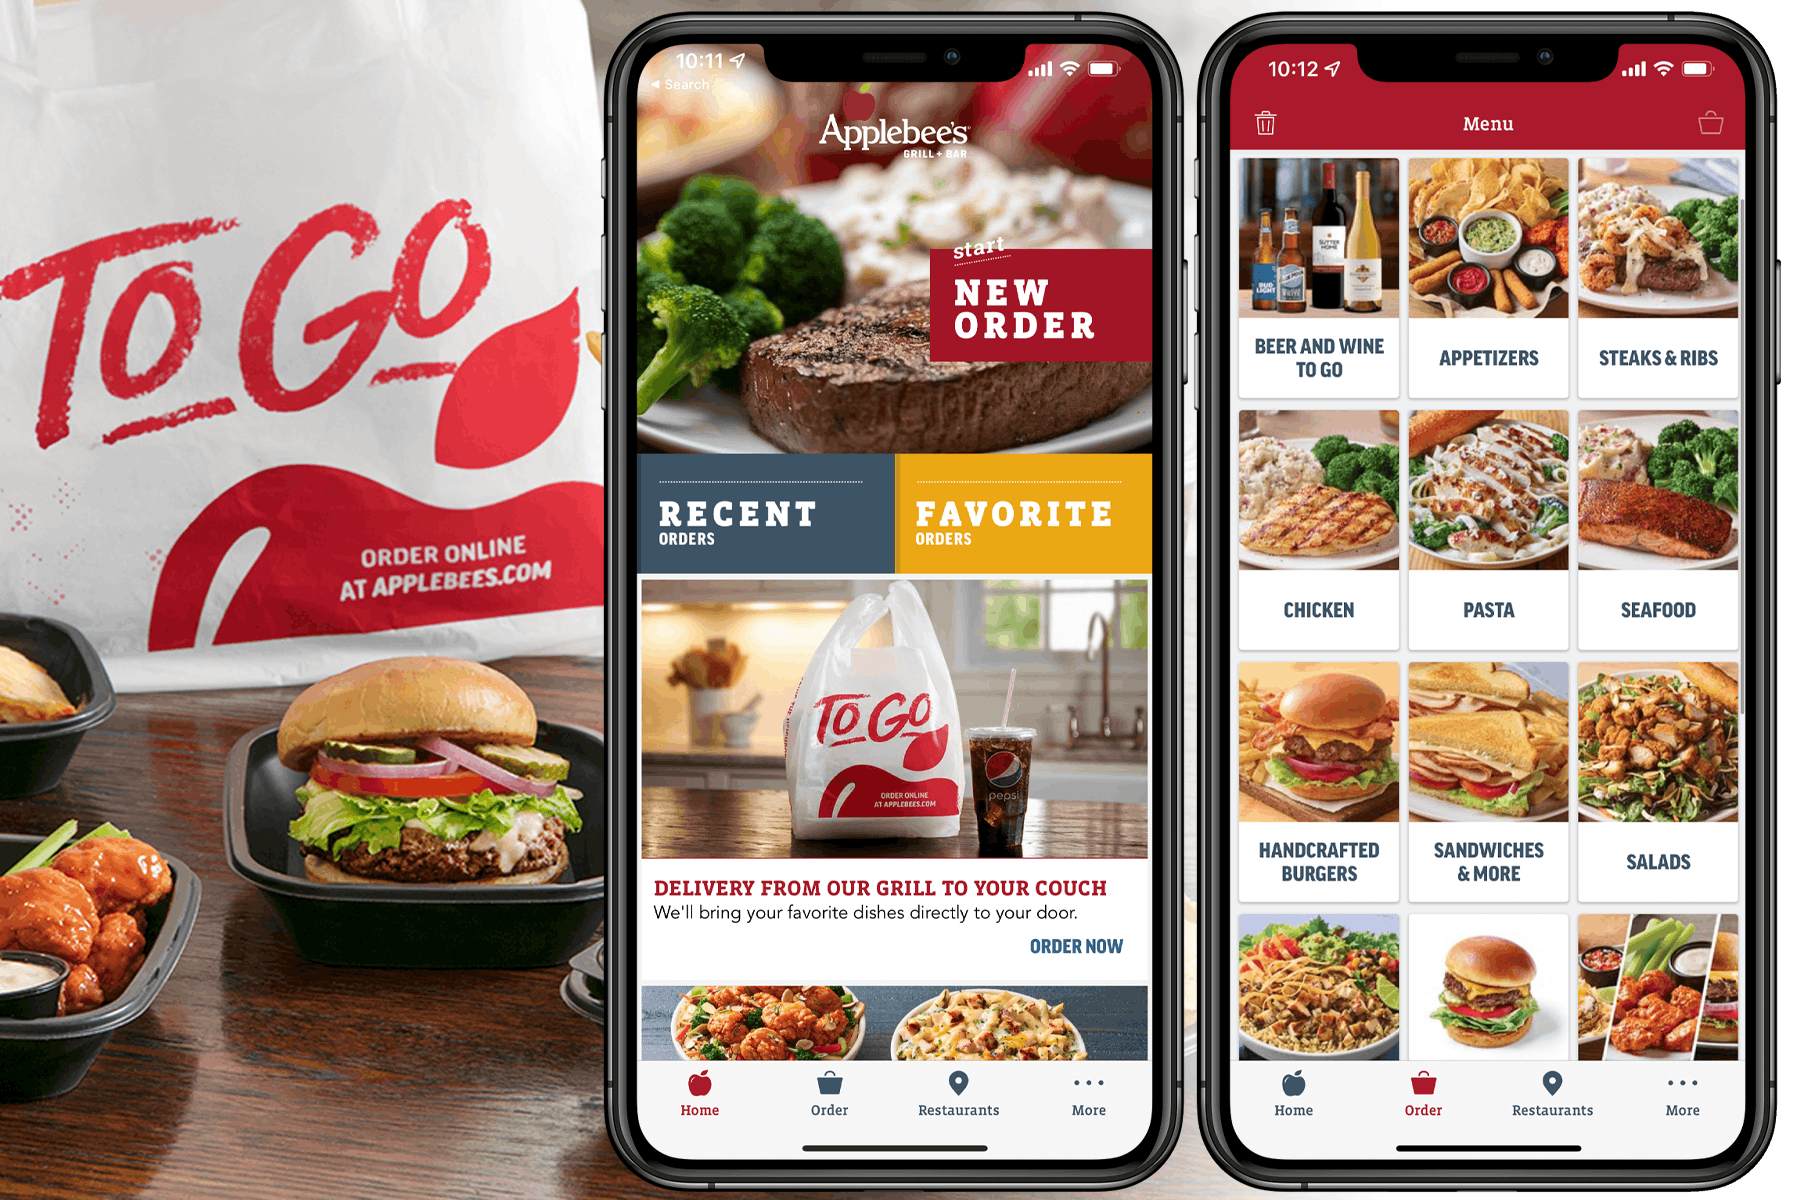 A graphic showing two iPhones, one showing the main page of the Applebee's mobile app and the other showing the Menu page on the Applebee's mobile app, next to an image of food in to-go containers on a table next to an Applebee's To-Go bag.